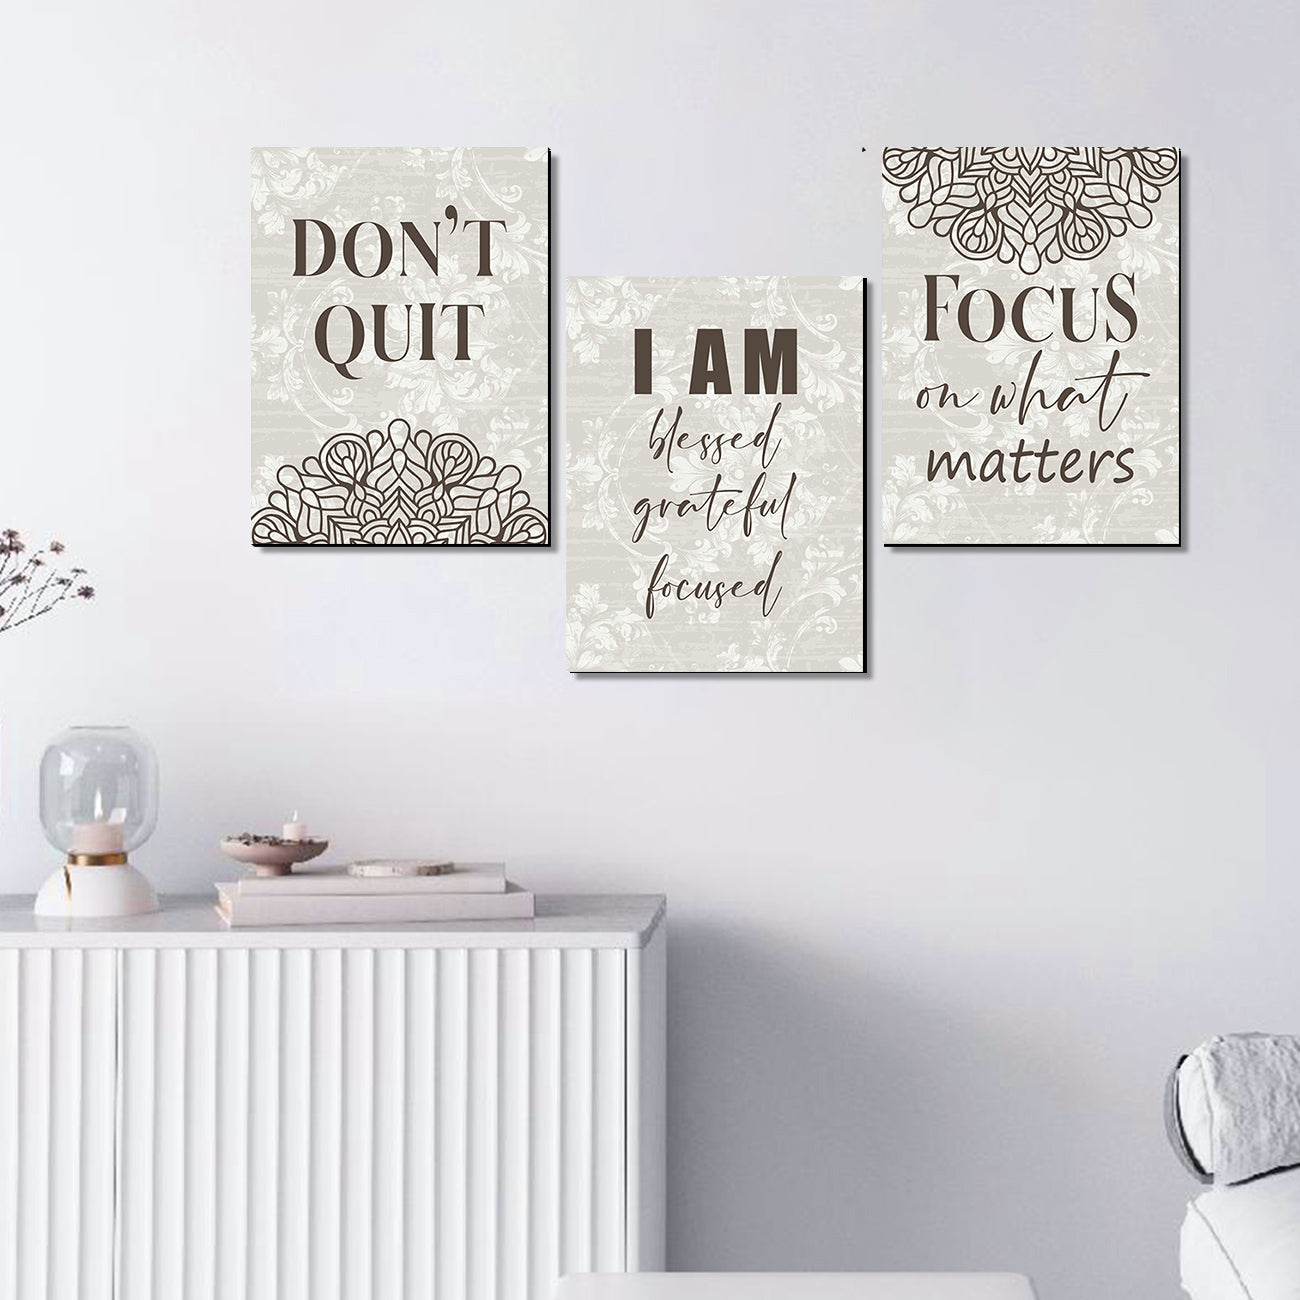 Motivational Quote Panels for Home Wall Decor - Quotes Art for